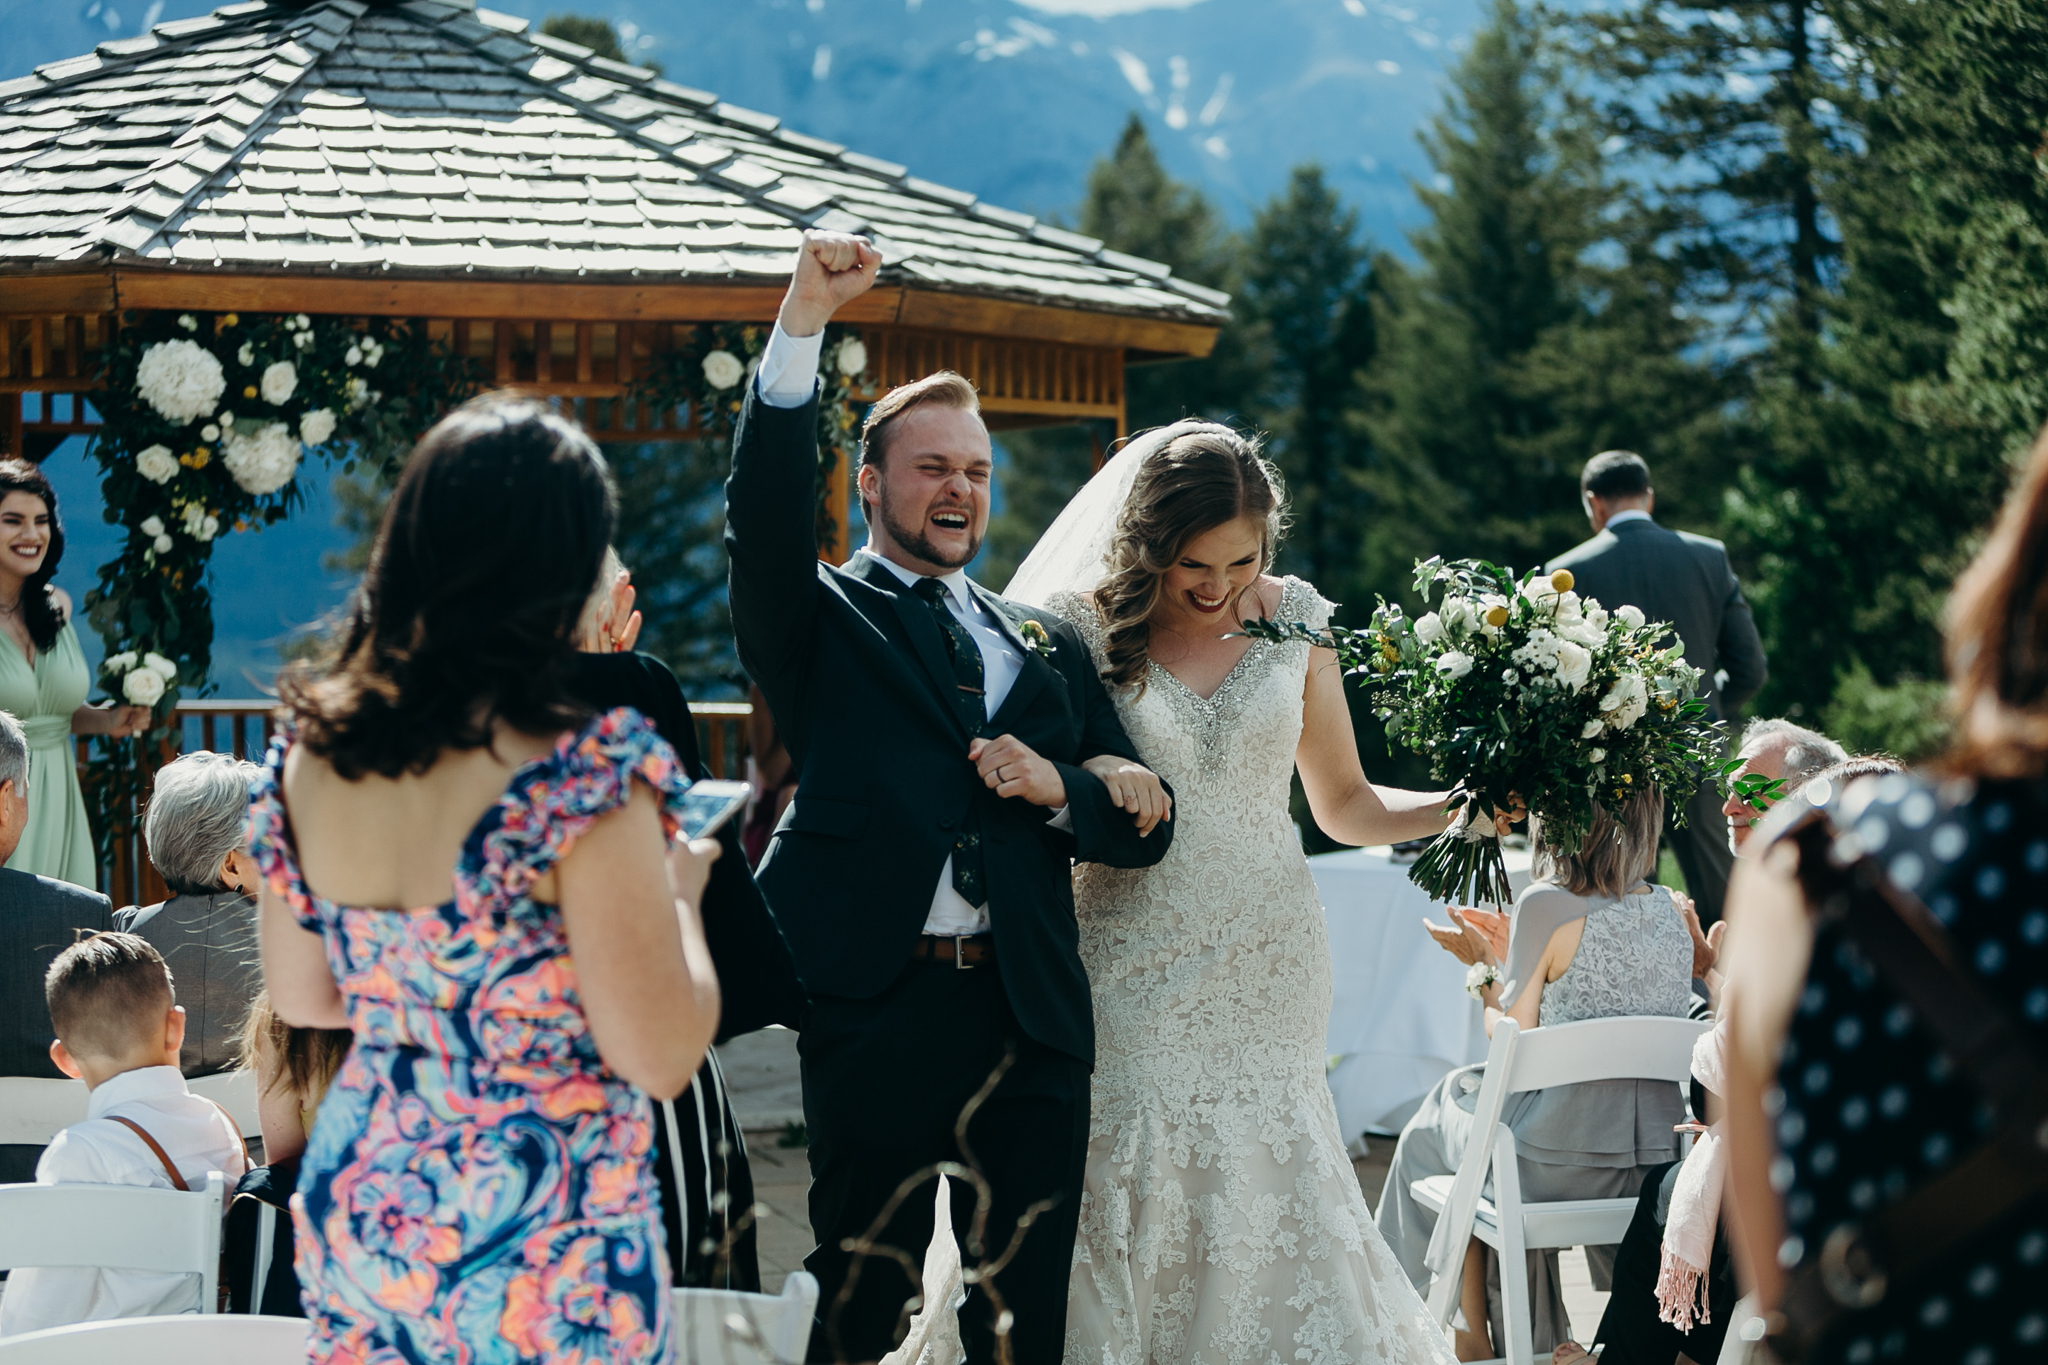 Bride and groom celebrate Wedding ceremony at gazebo Silvertip Resort Canmore AB rocky mountain wedding